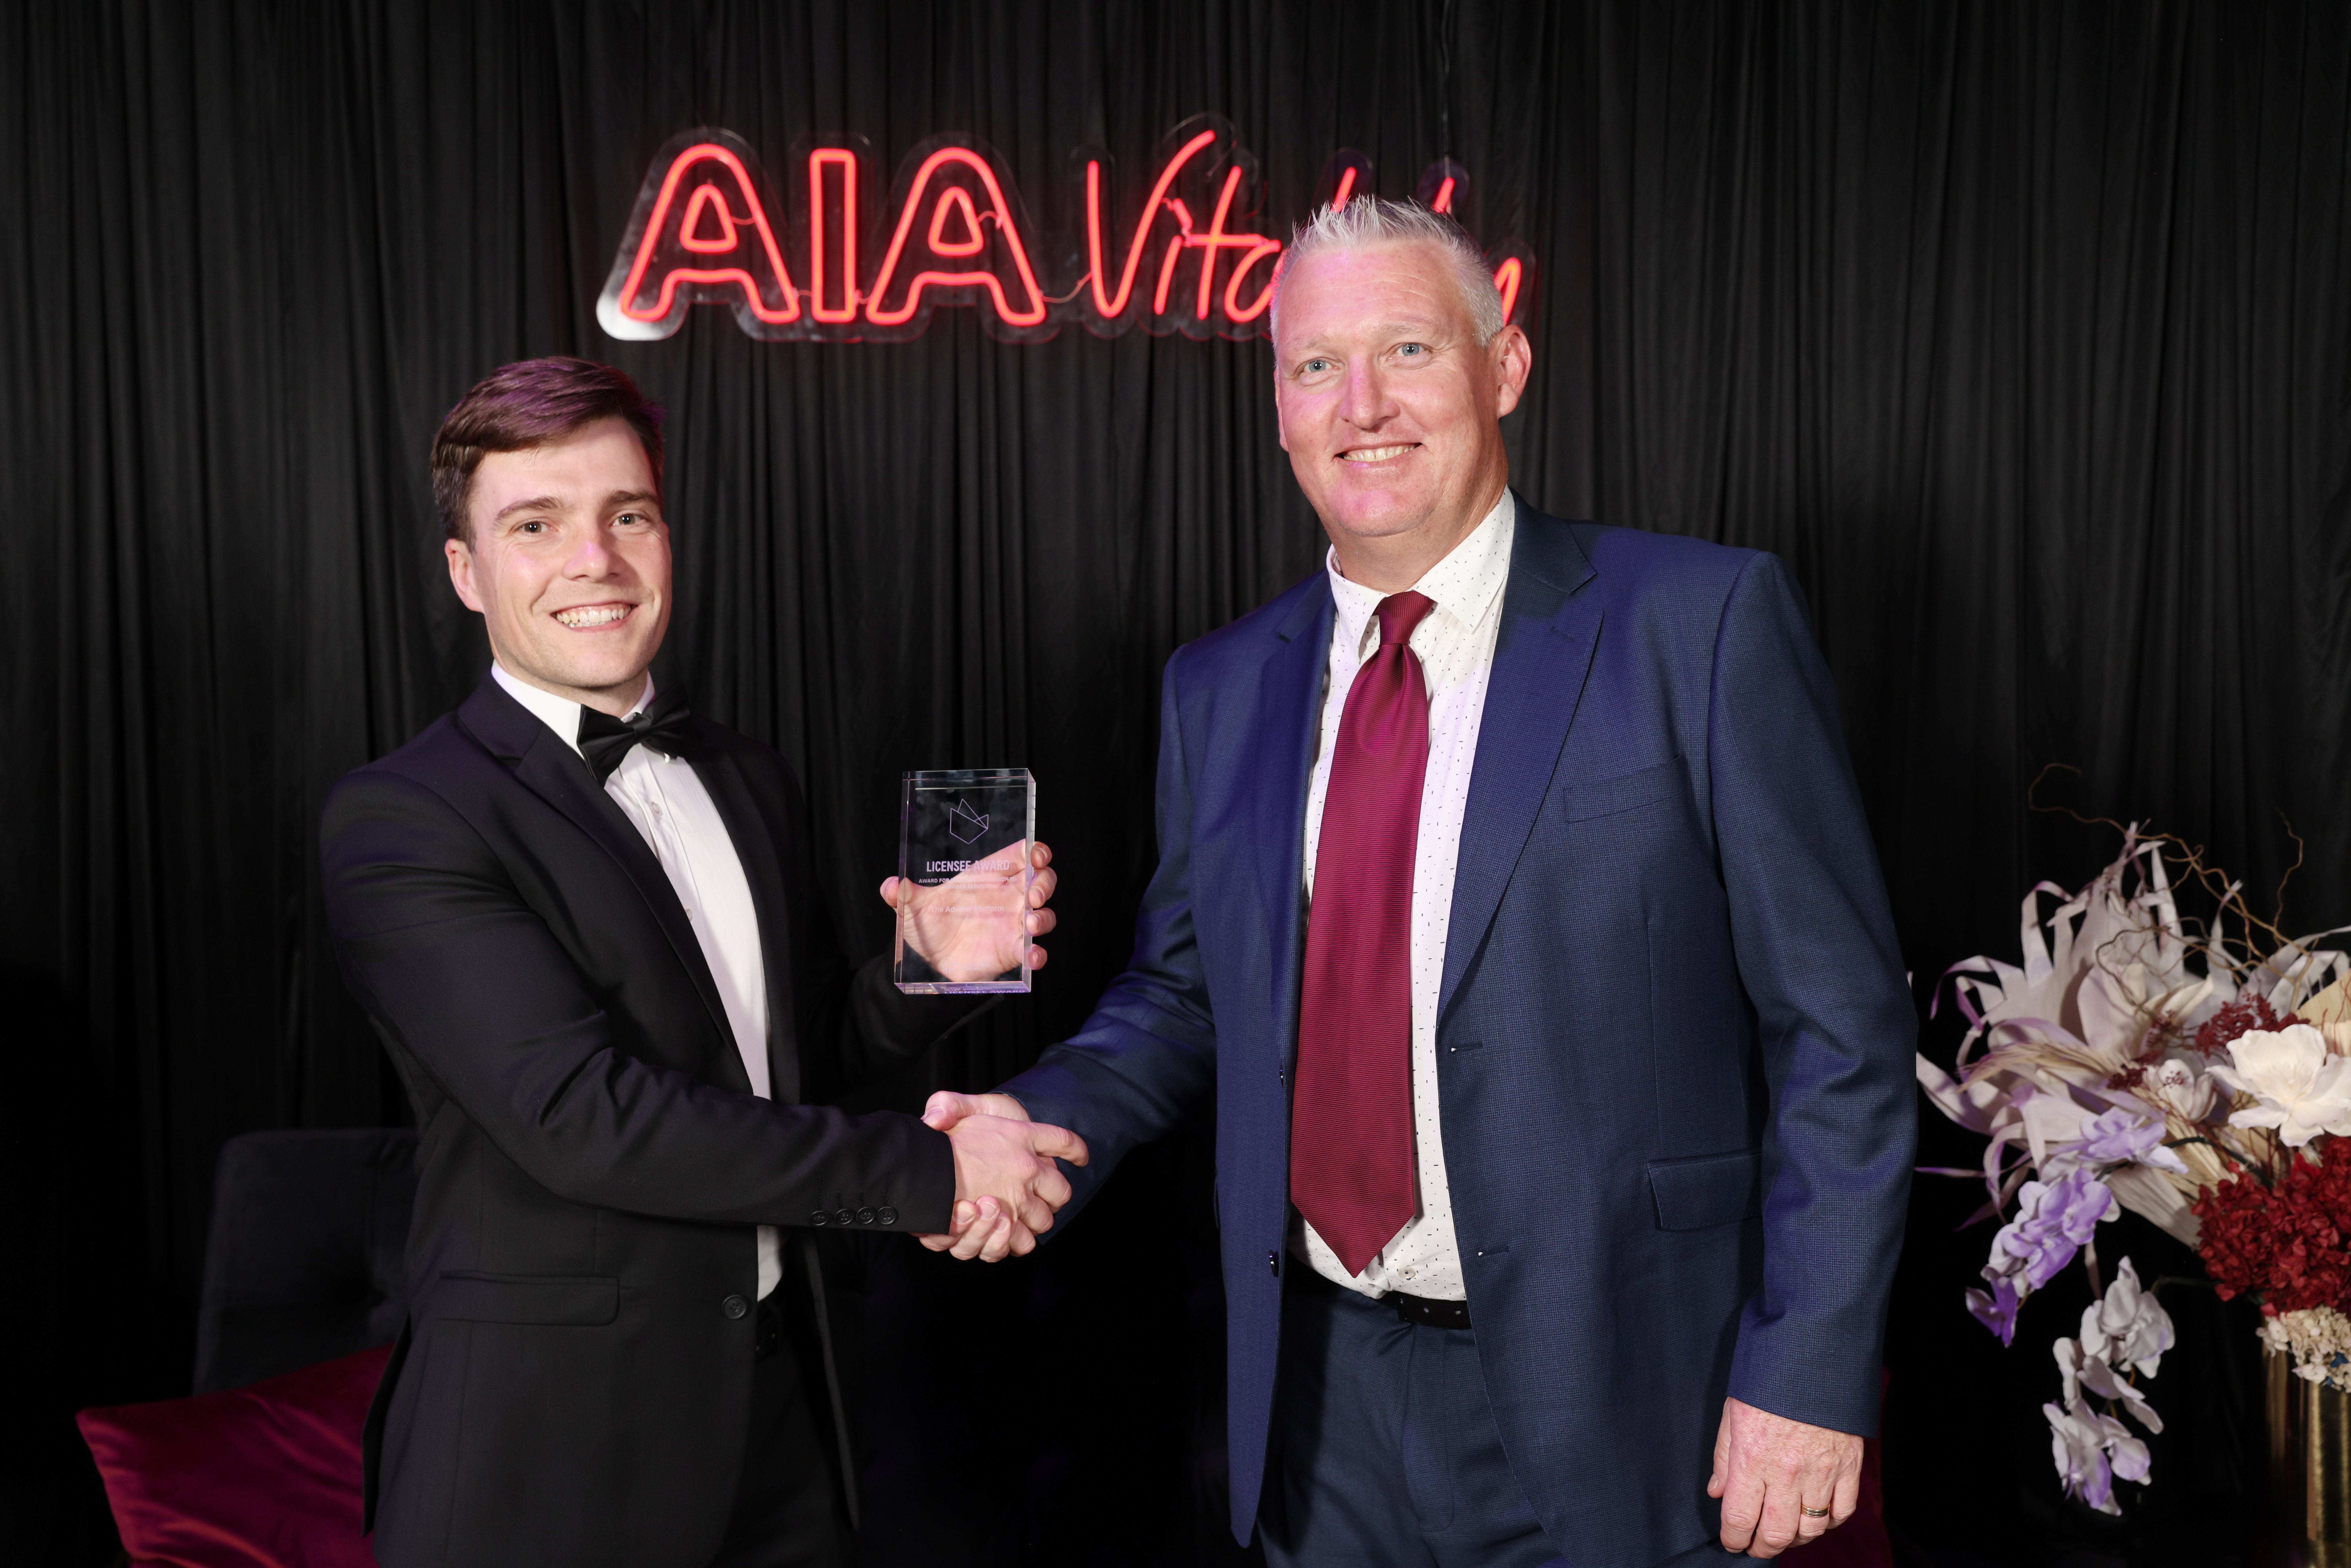 AIA's Ben McQuay presenting the Licensee award for business innovation to The Adviser Platform's Key Account Manager Myles Leacy.